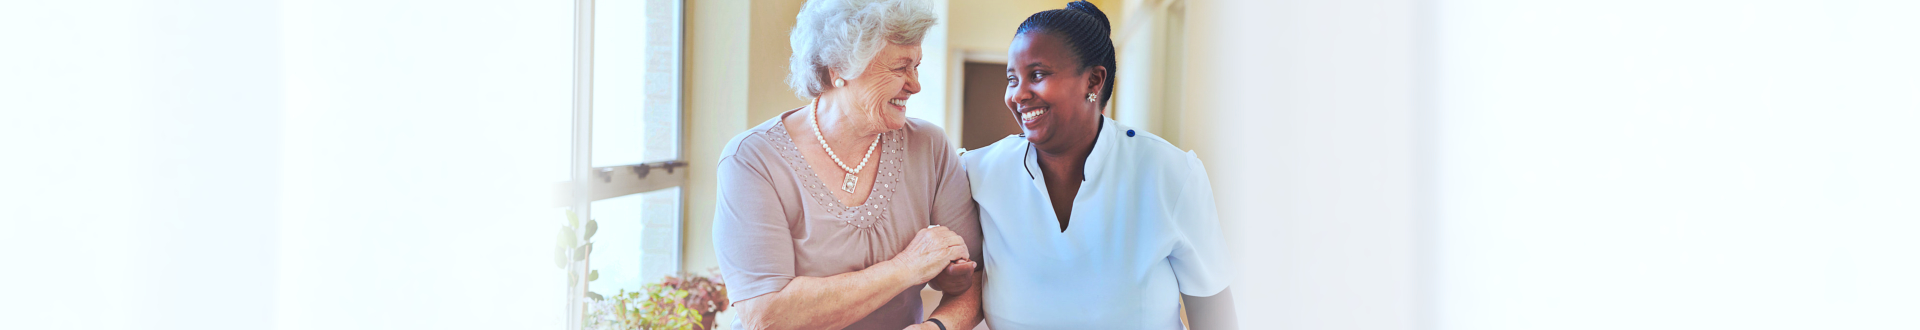 senior woman smiling together with caregiver